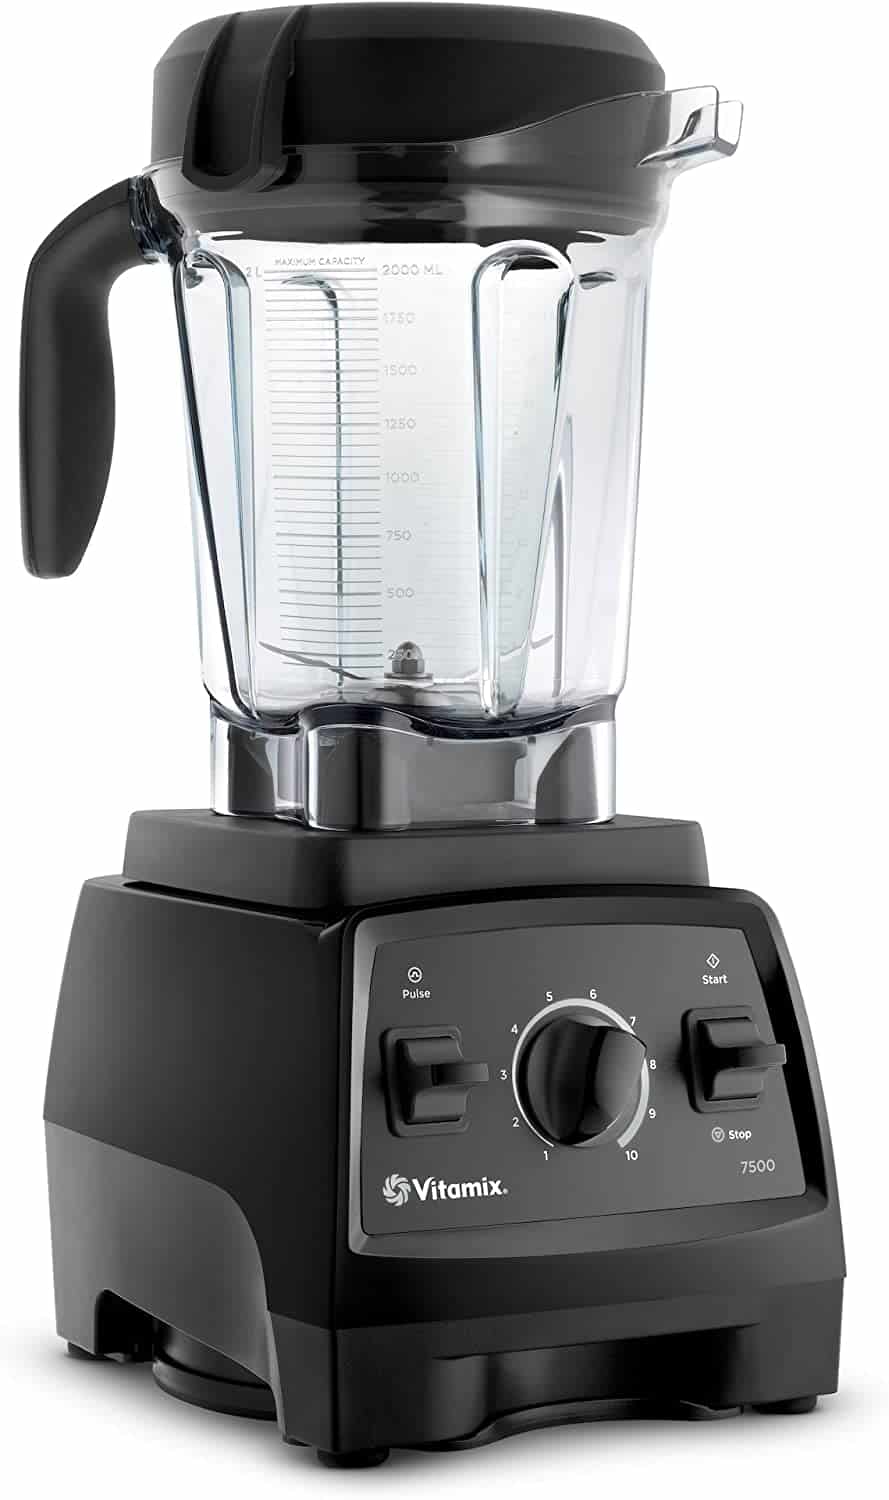 How To Set And Use Variable 1 On Vitamix 7500? – Press To Cook